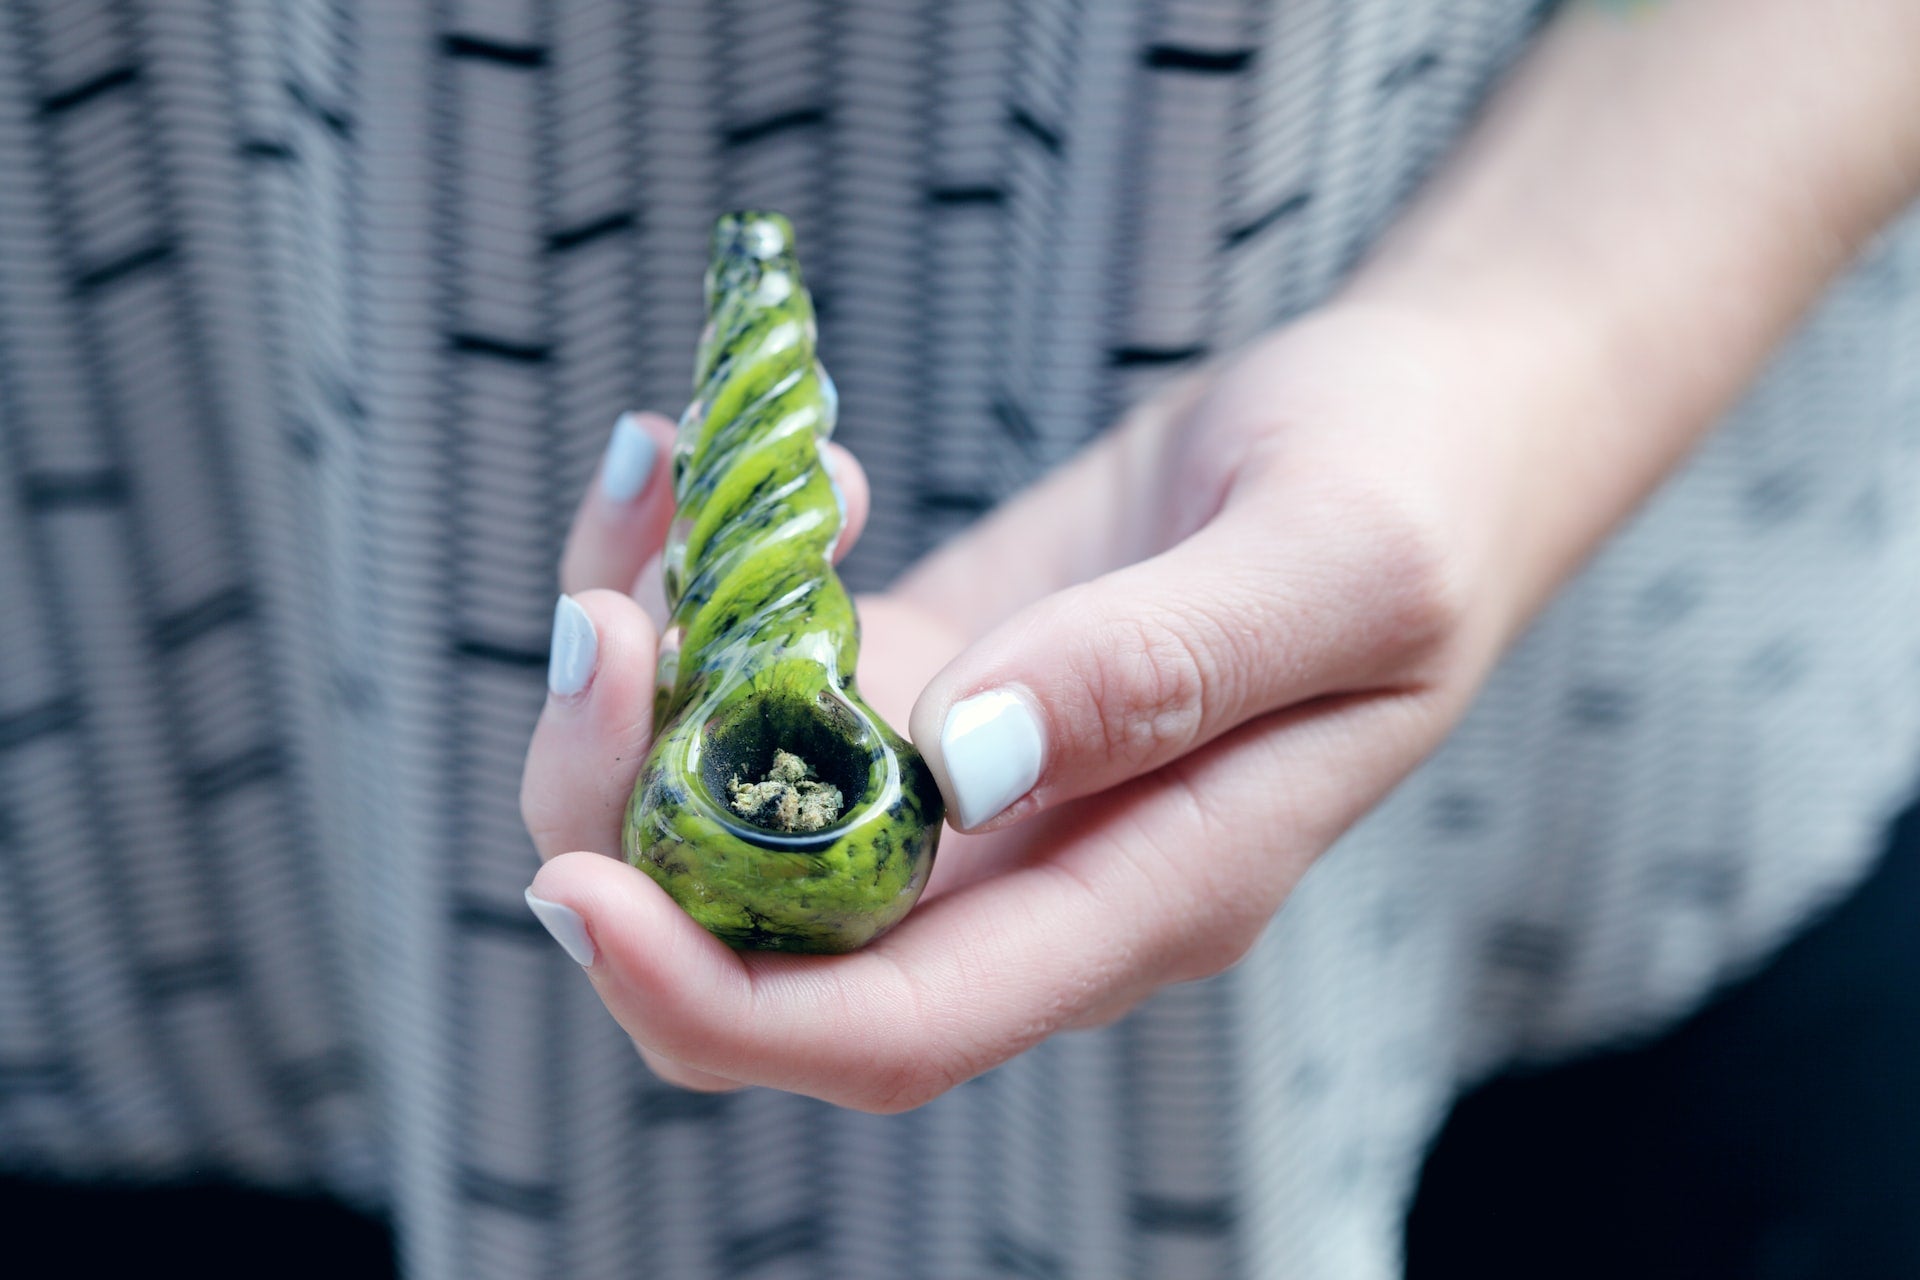 A bowl of cannabis in a pipe. A girl is holding the pipe in her left hand.